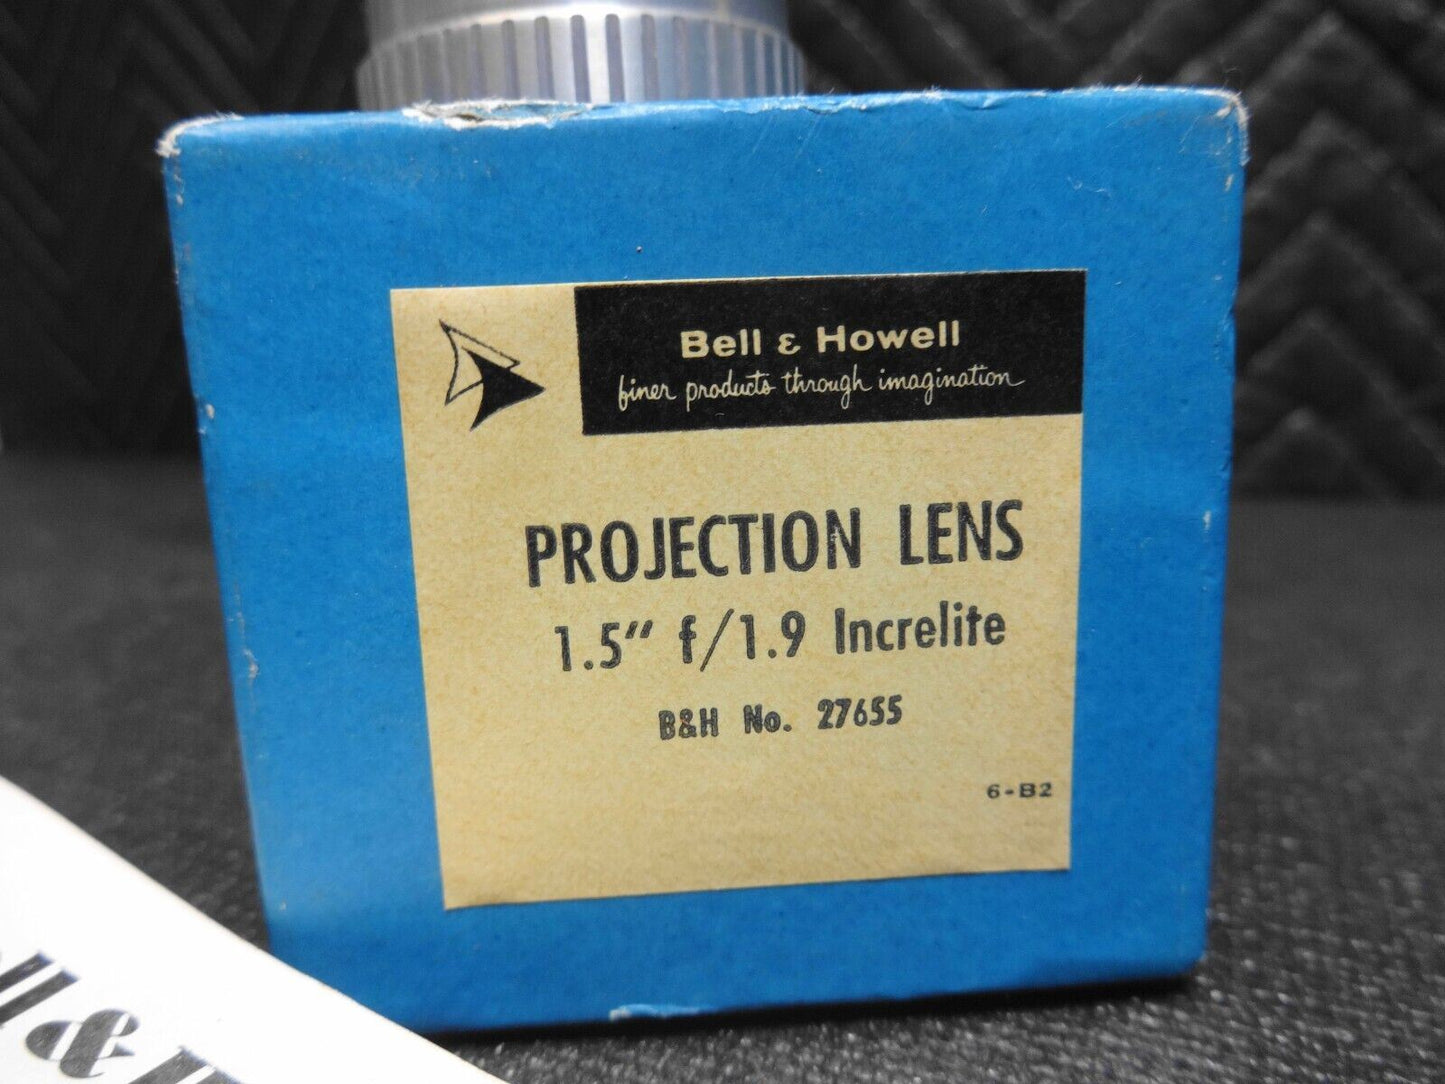 NOS Bell & Howell 16mm Projector Lens 1.5 inch f/1.9 Increlite w/ Paper